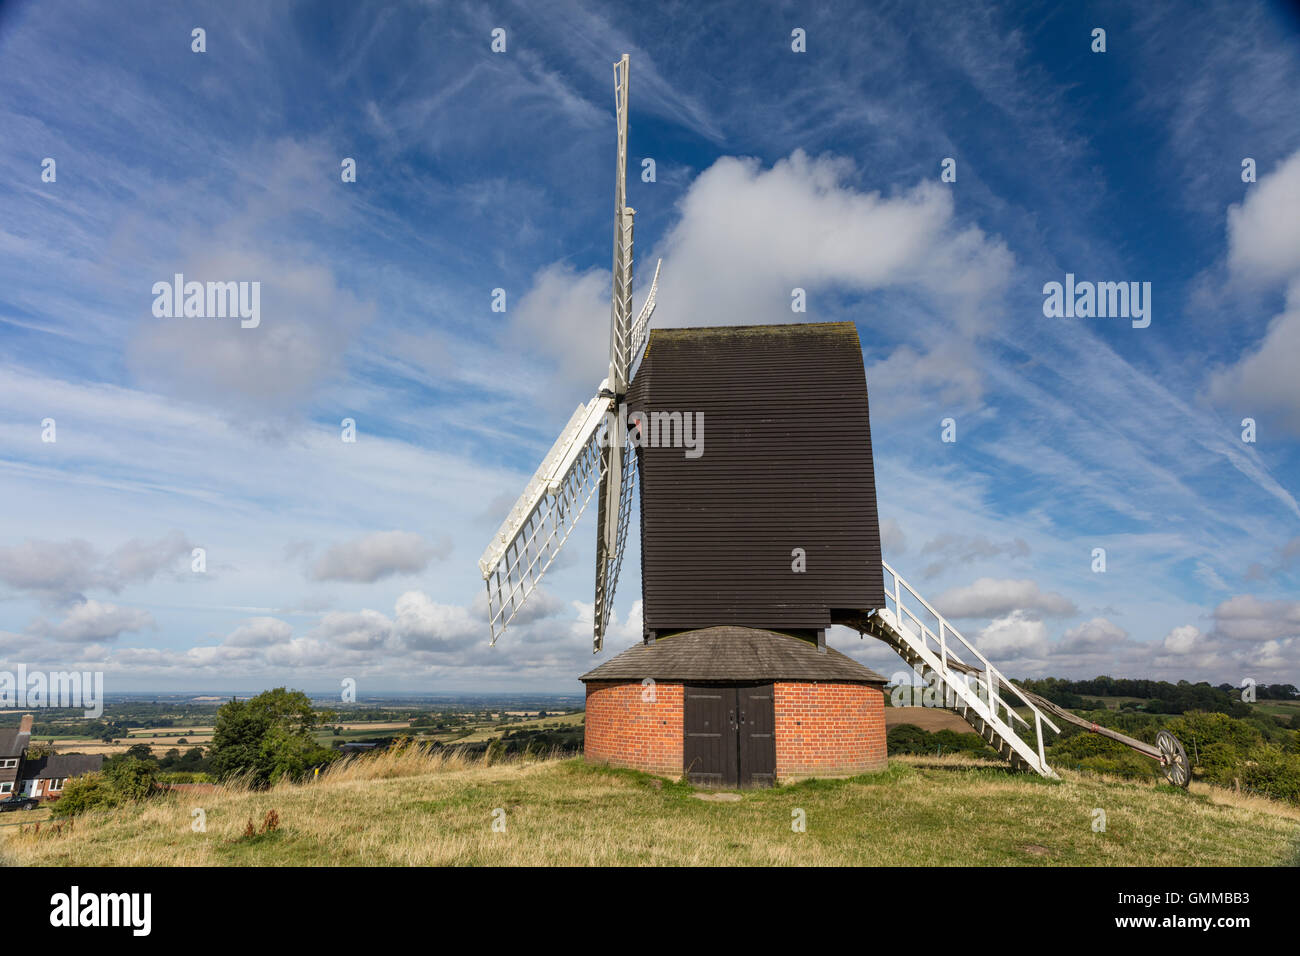 Brill windmill, a post windmill situated on Brill Common, Aylesbury, Buckingham. It was in use from 1668 to 1906. Stock Photo